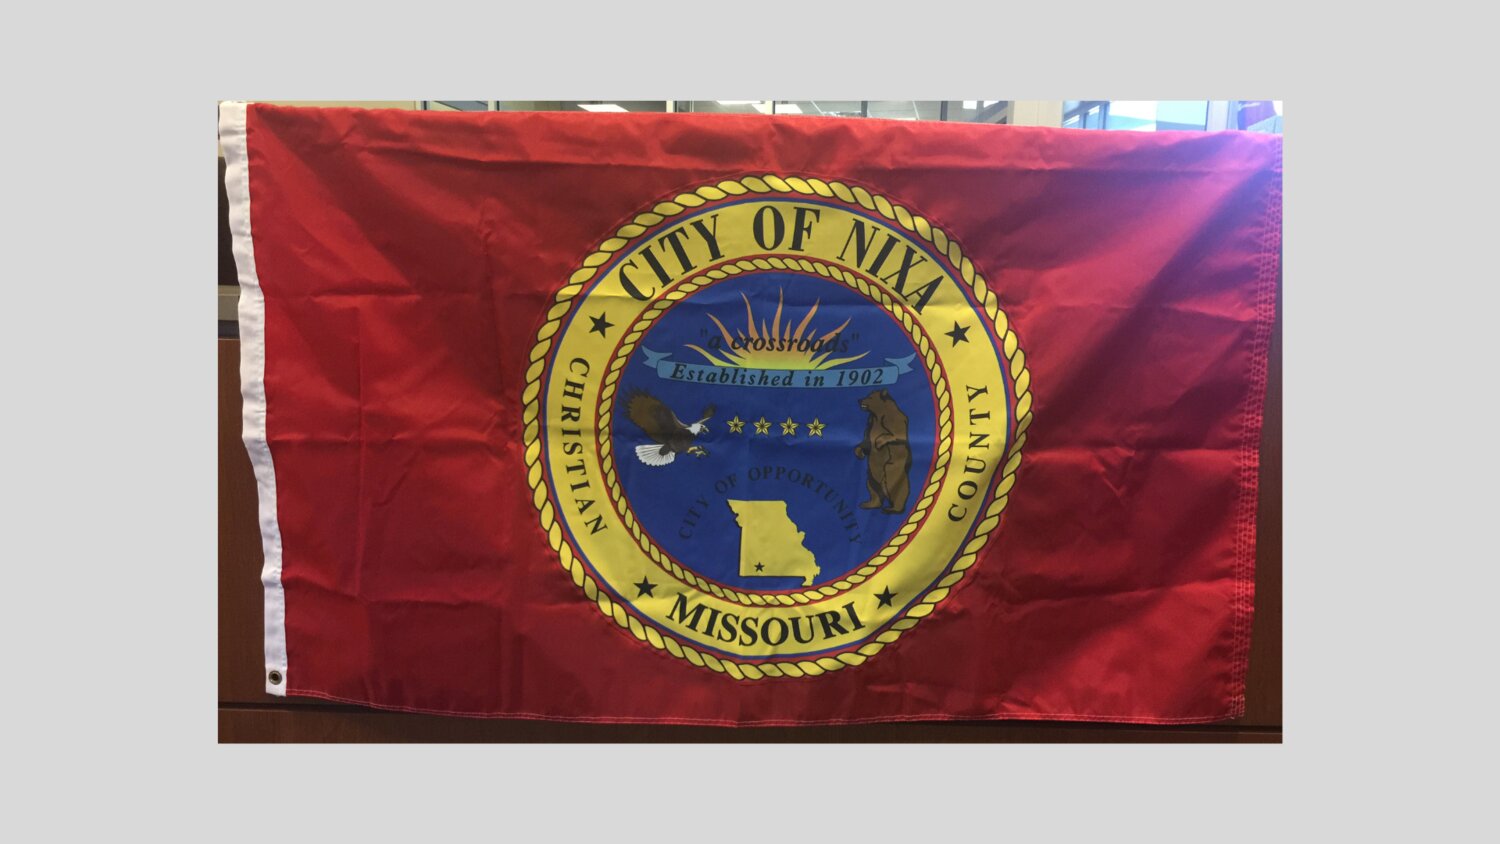 The city's old flag was used prior to 2018.